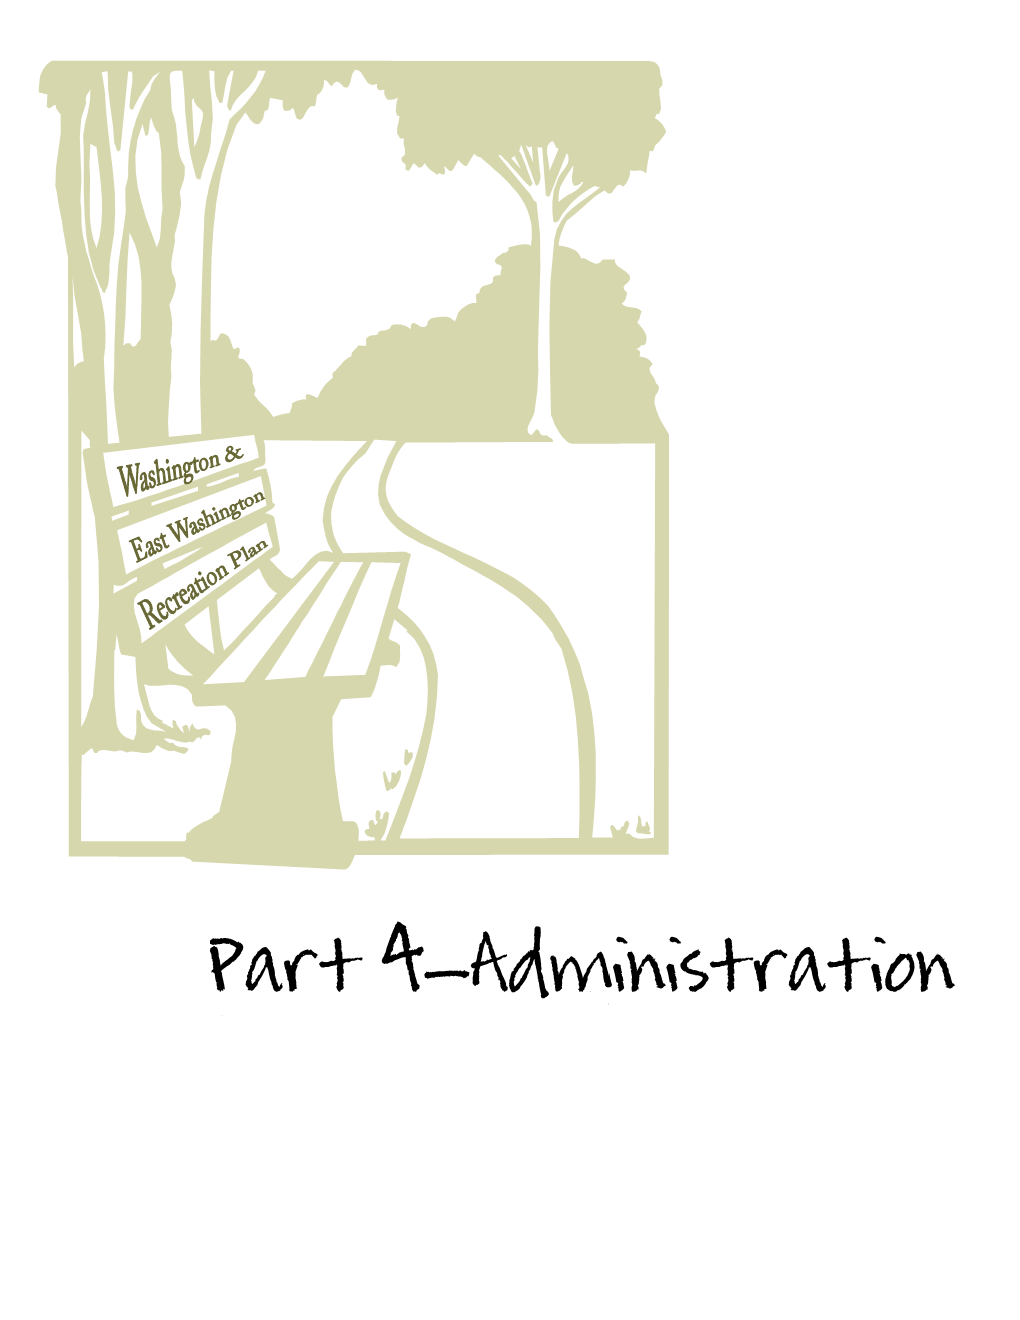 Part 4-Administration City of Washington & the Borough of East Washington Comprehensive Parks and Recreation Plan